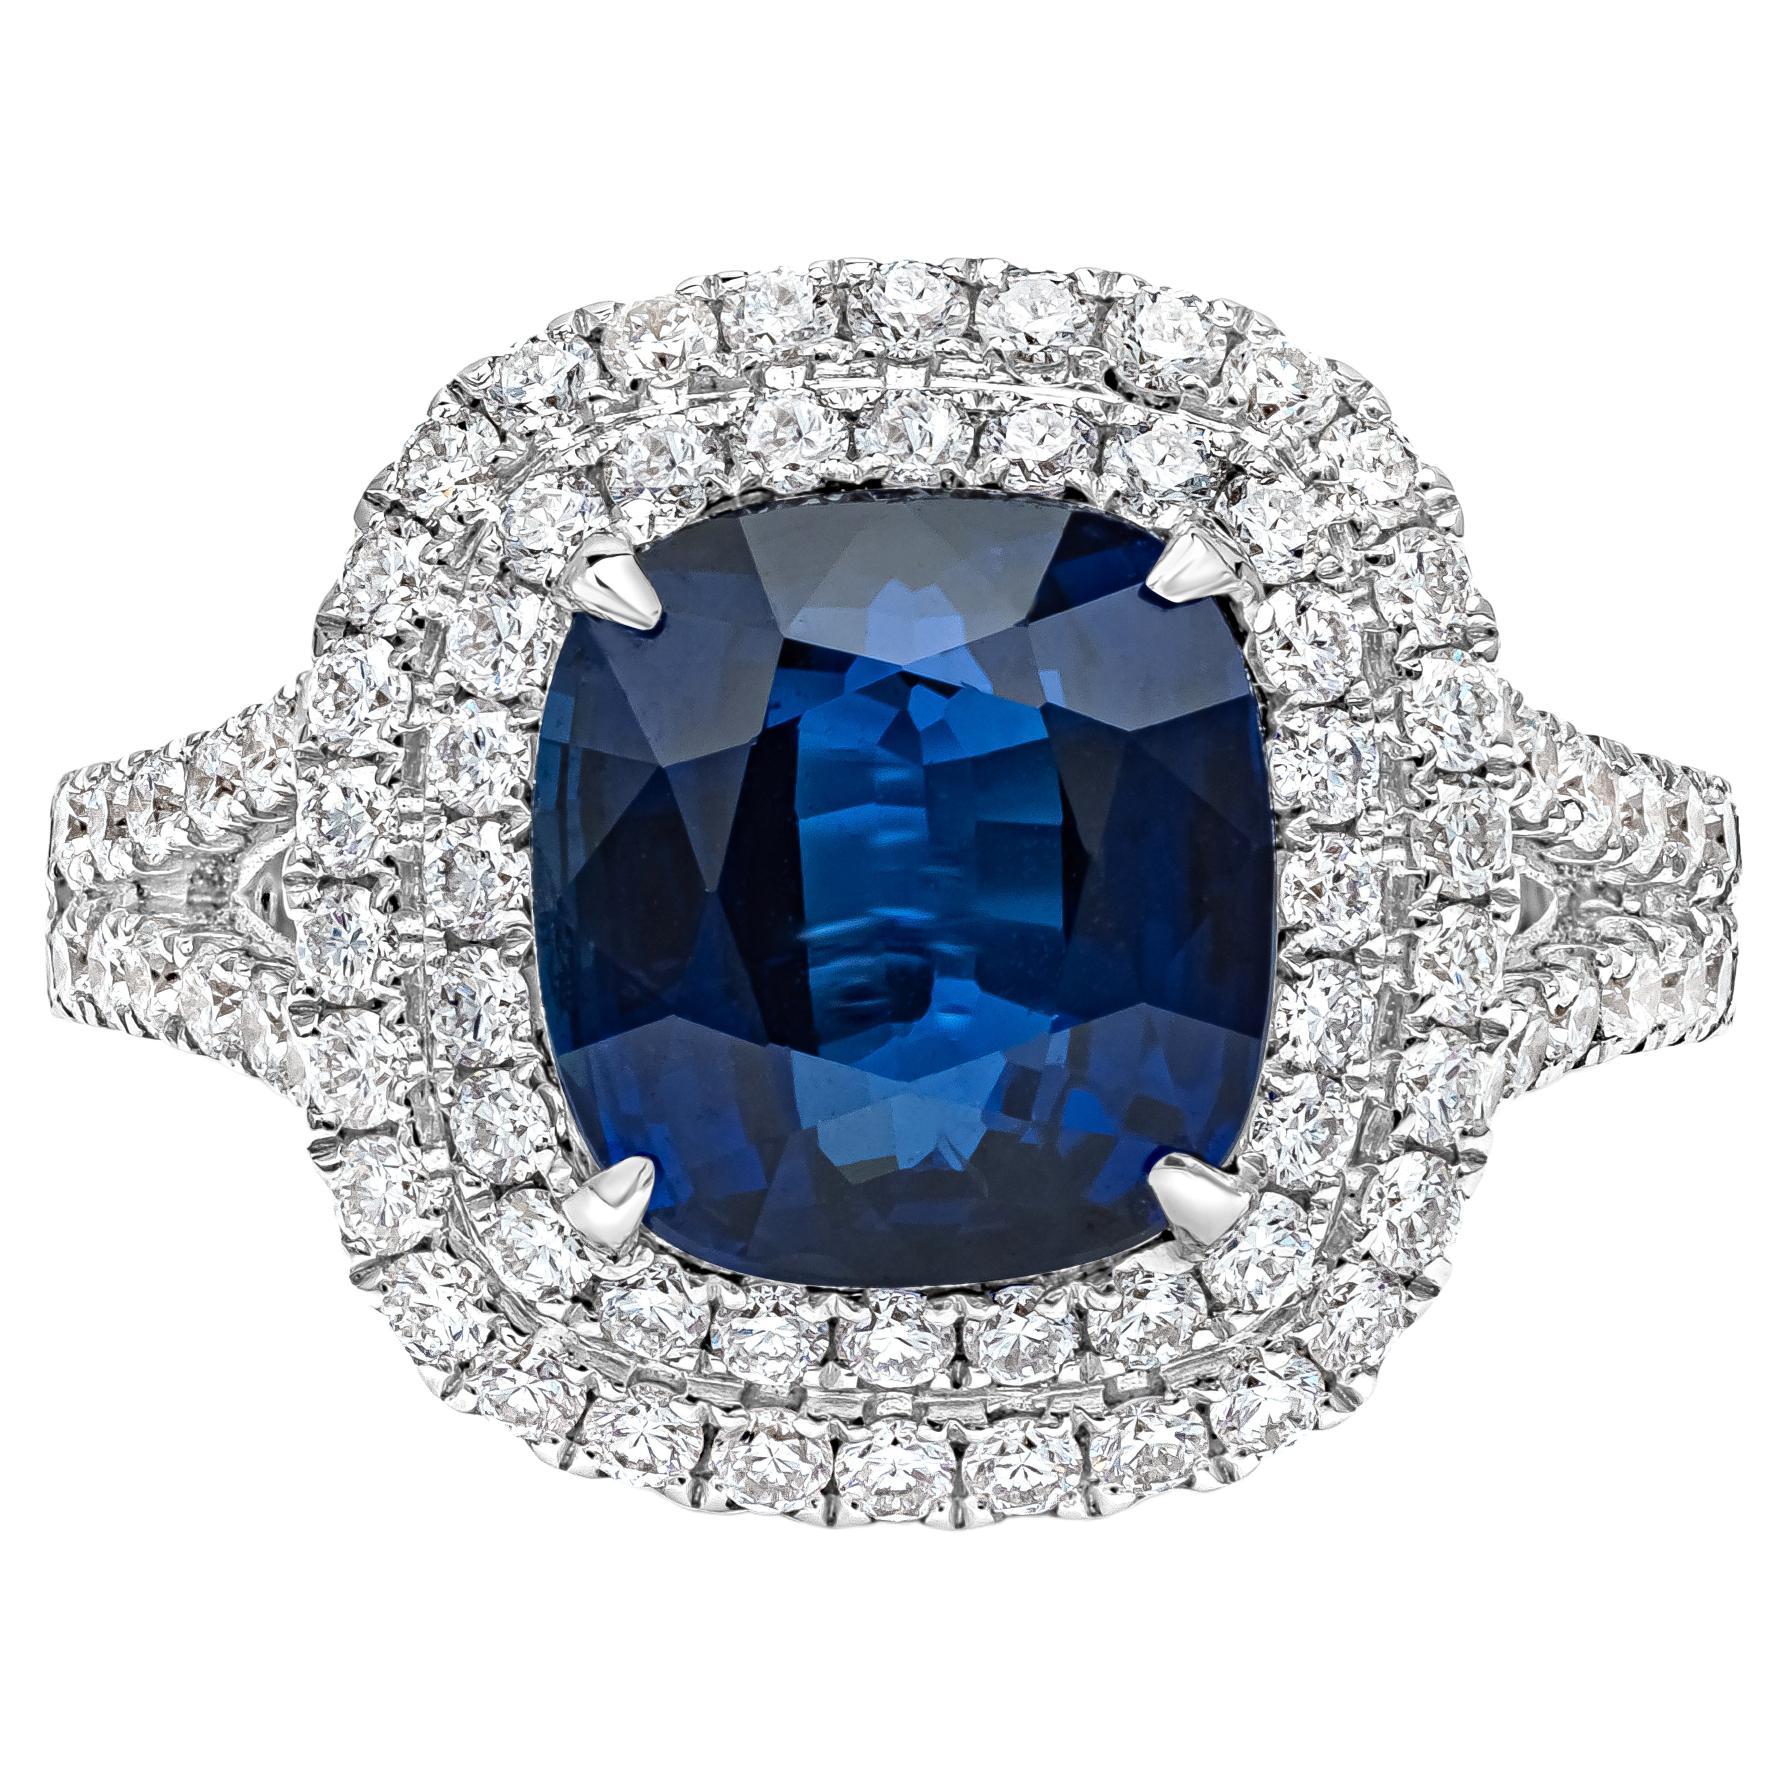 5.05 Carats Cushion Cut Blue Sapphire and Diamond Halo Engagement Ring